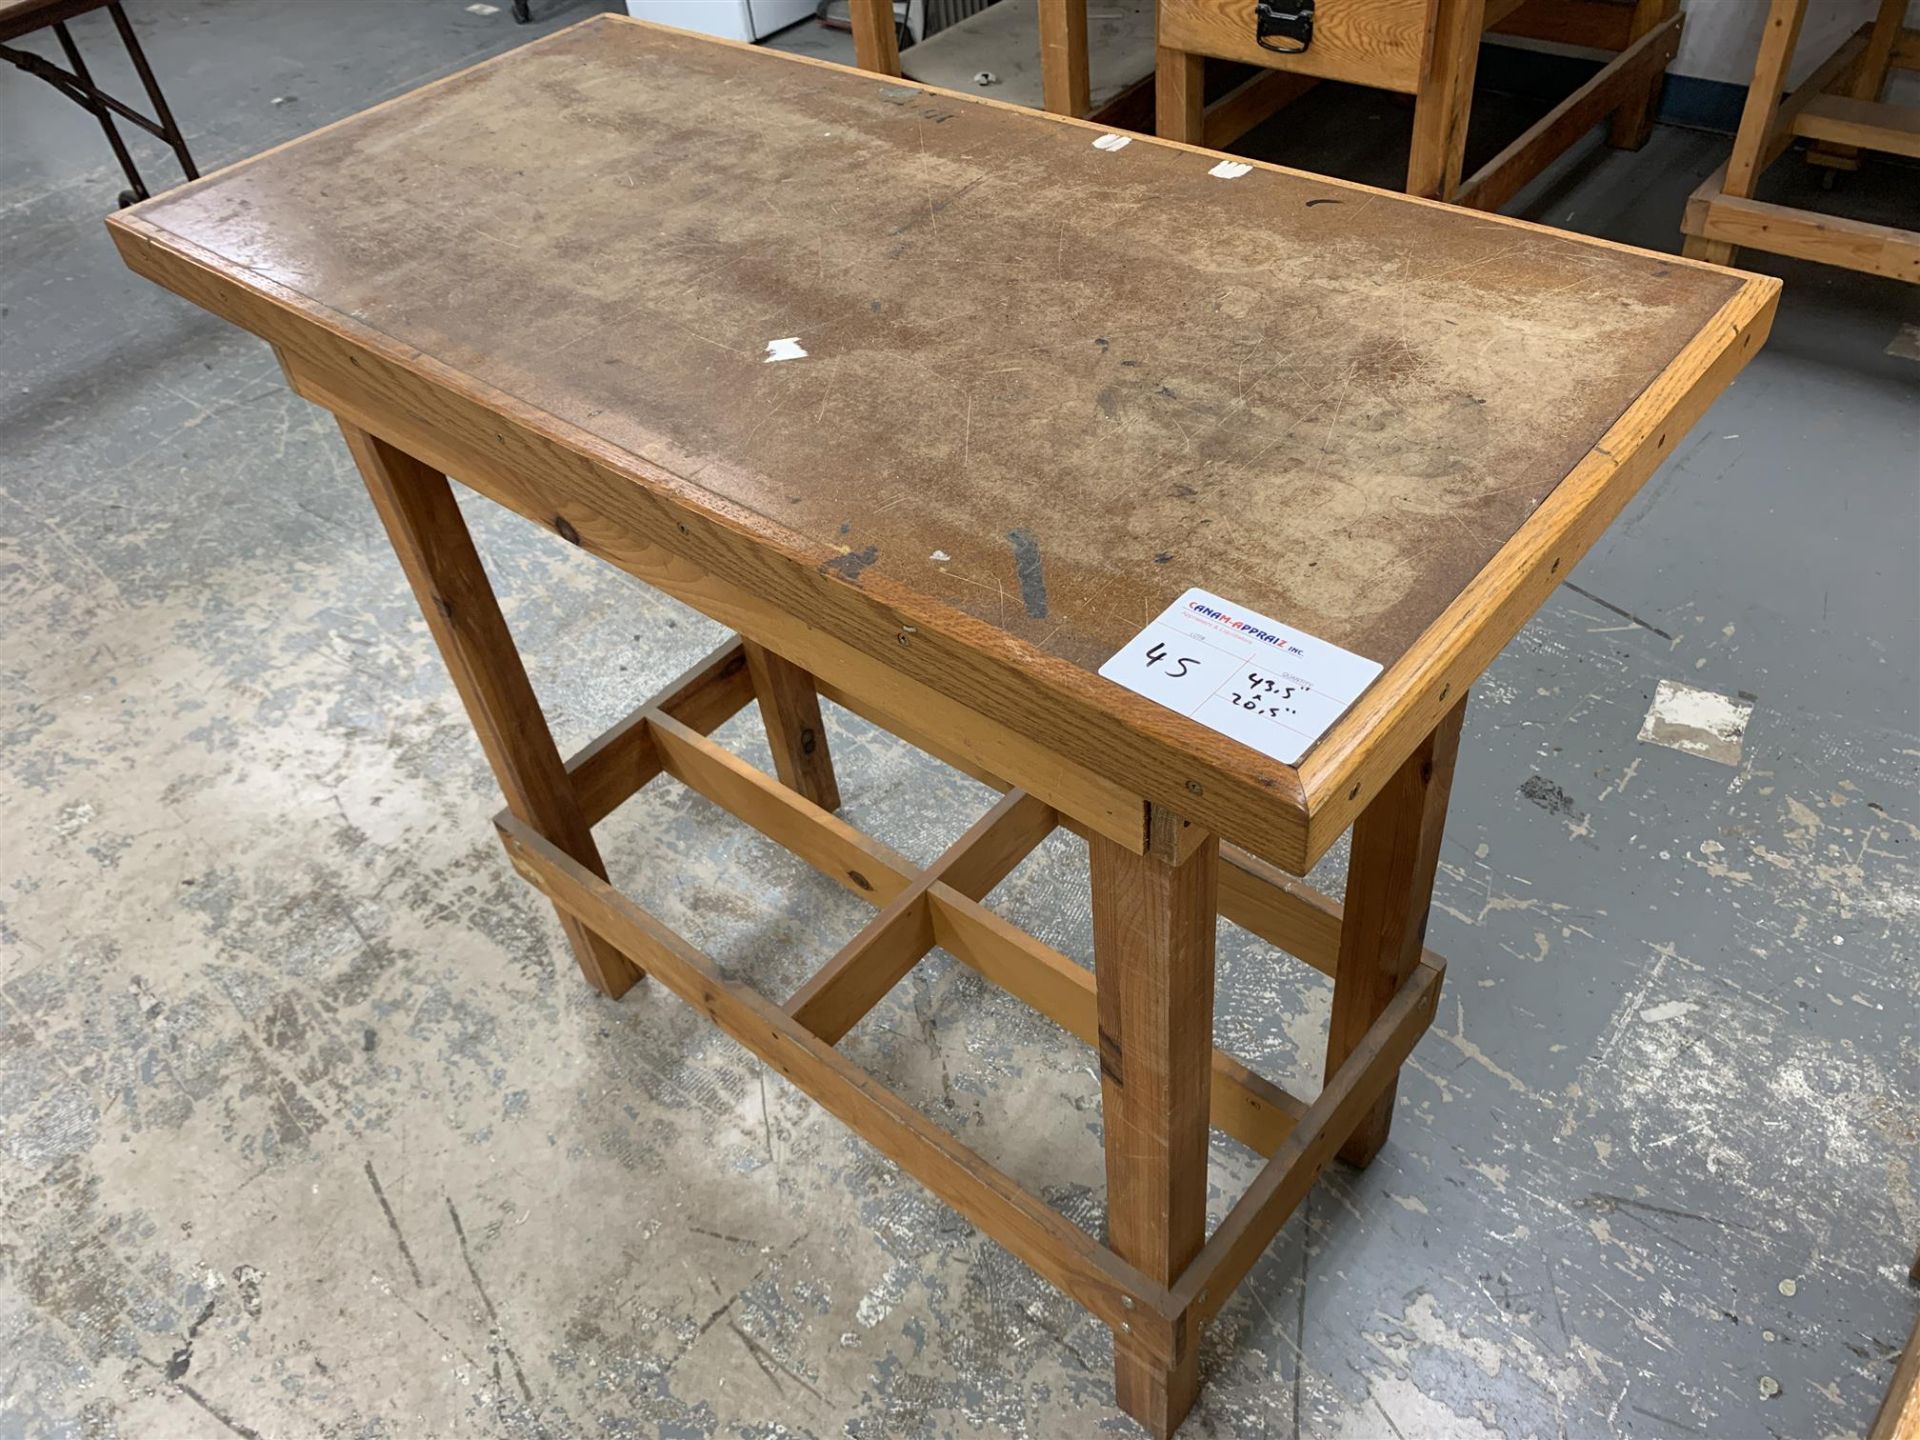 SOLID WOOD WORK TABLE - 43.5" X 20.5"